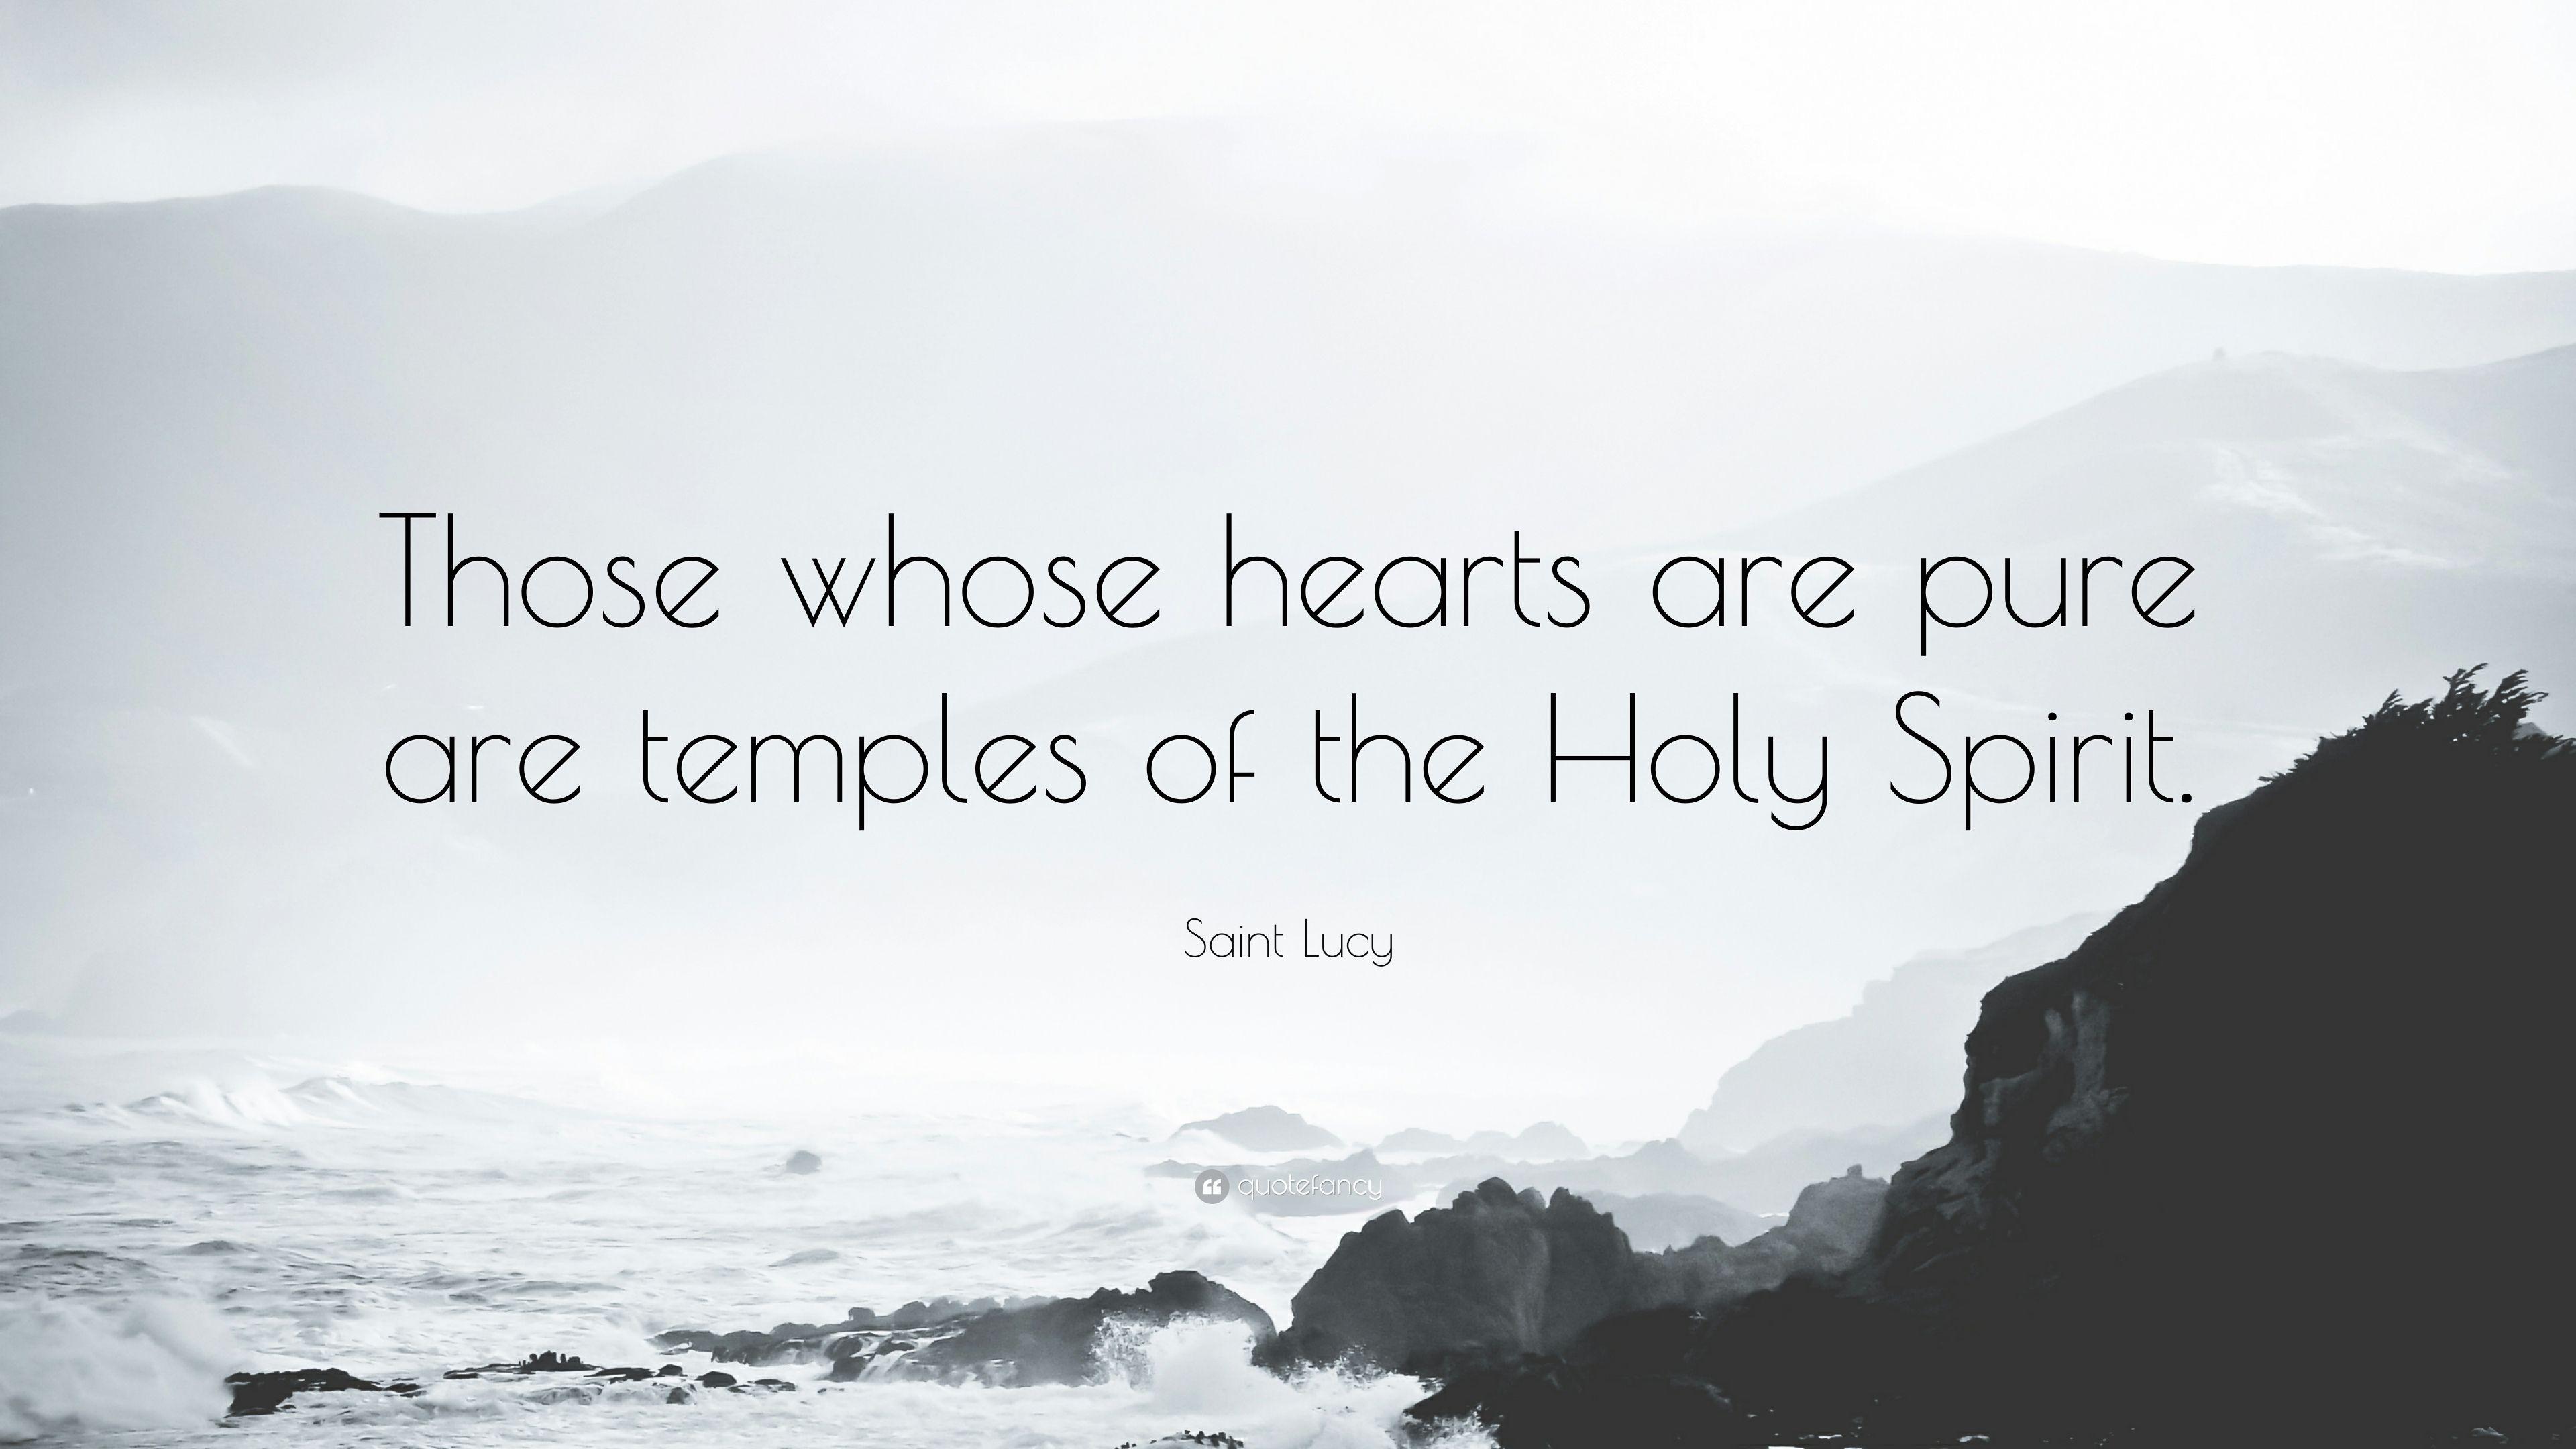 Saint Lucy Quote: “Those whose hearts are pure are temples